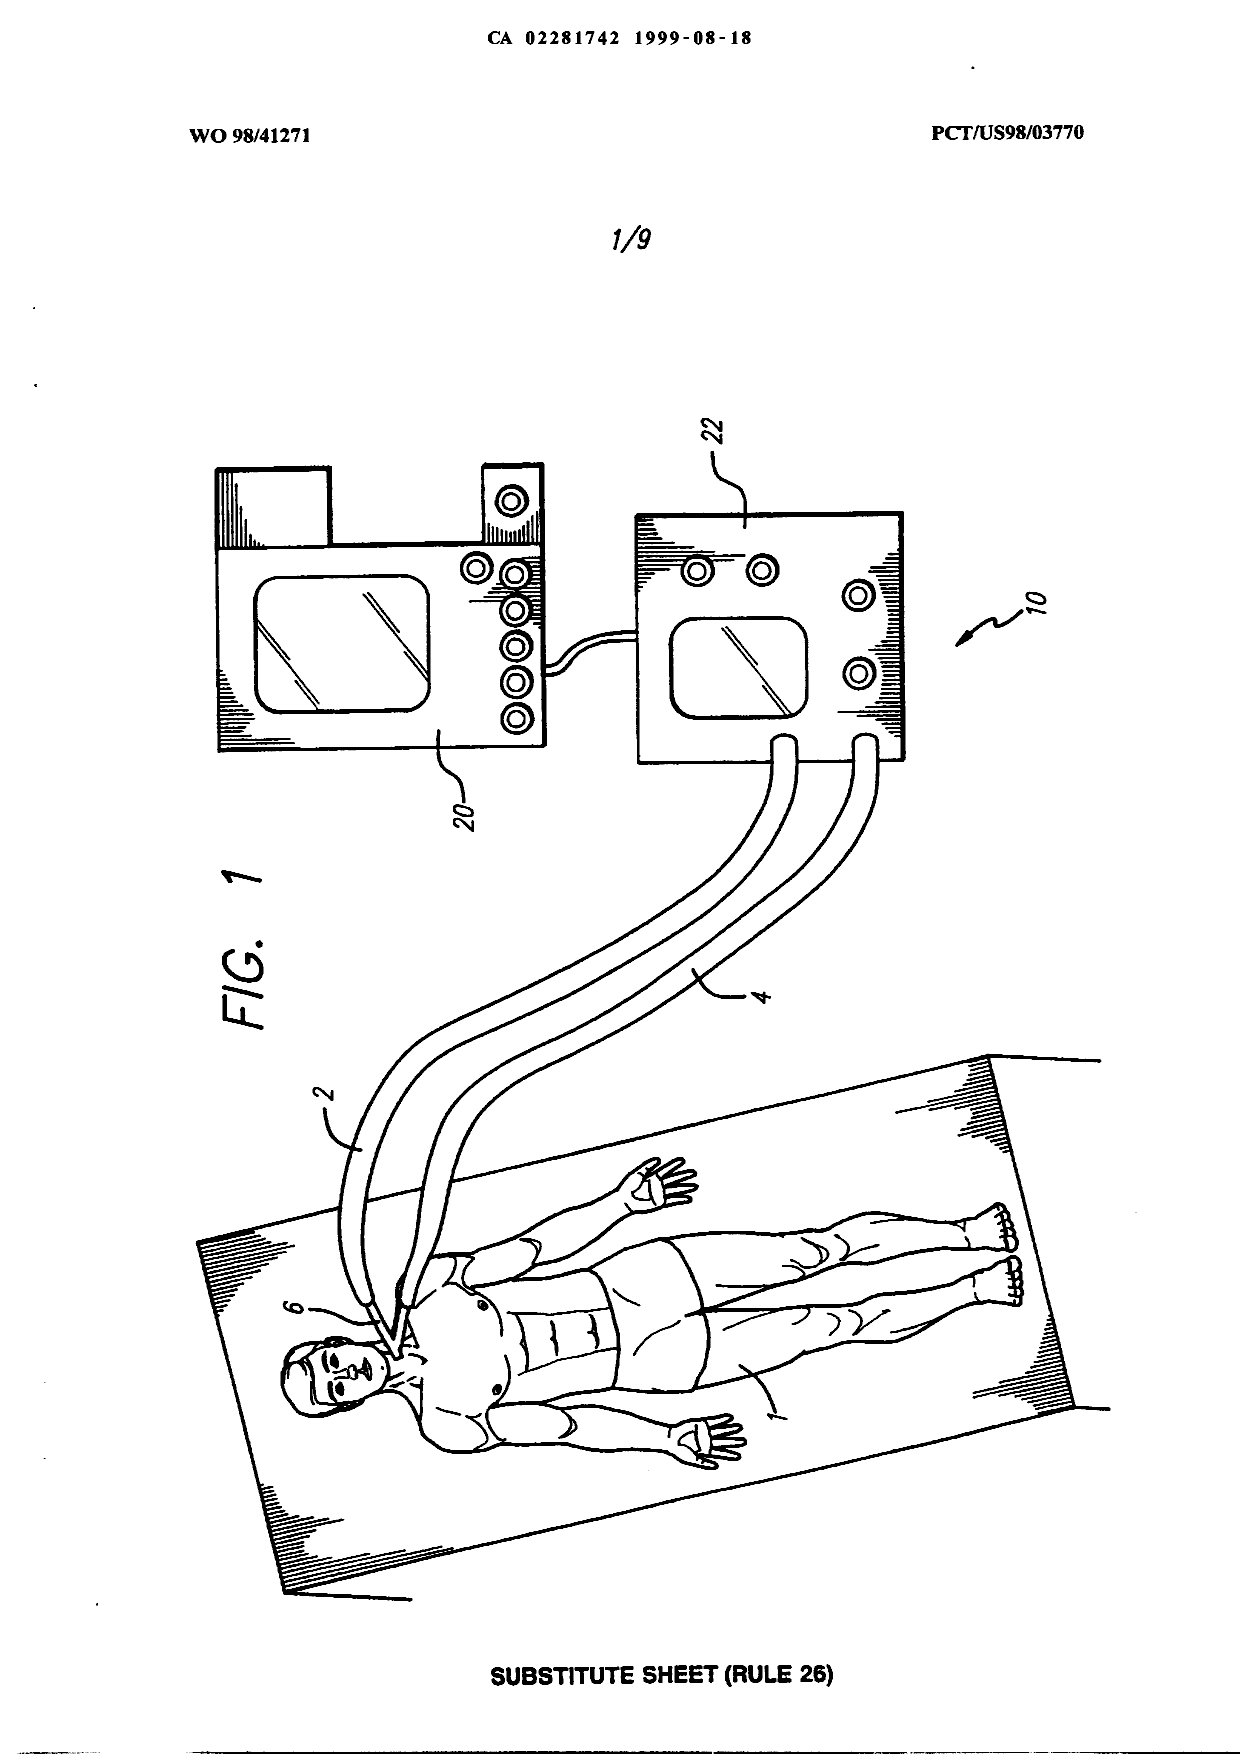 Canadian Patent Document 2281742. Drawings 19990818. Image 1 of 9